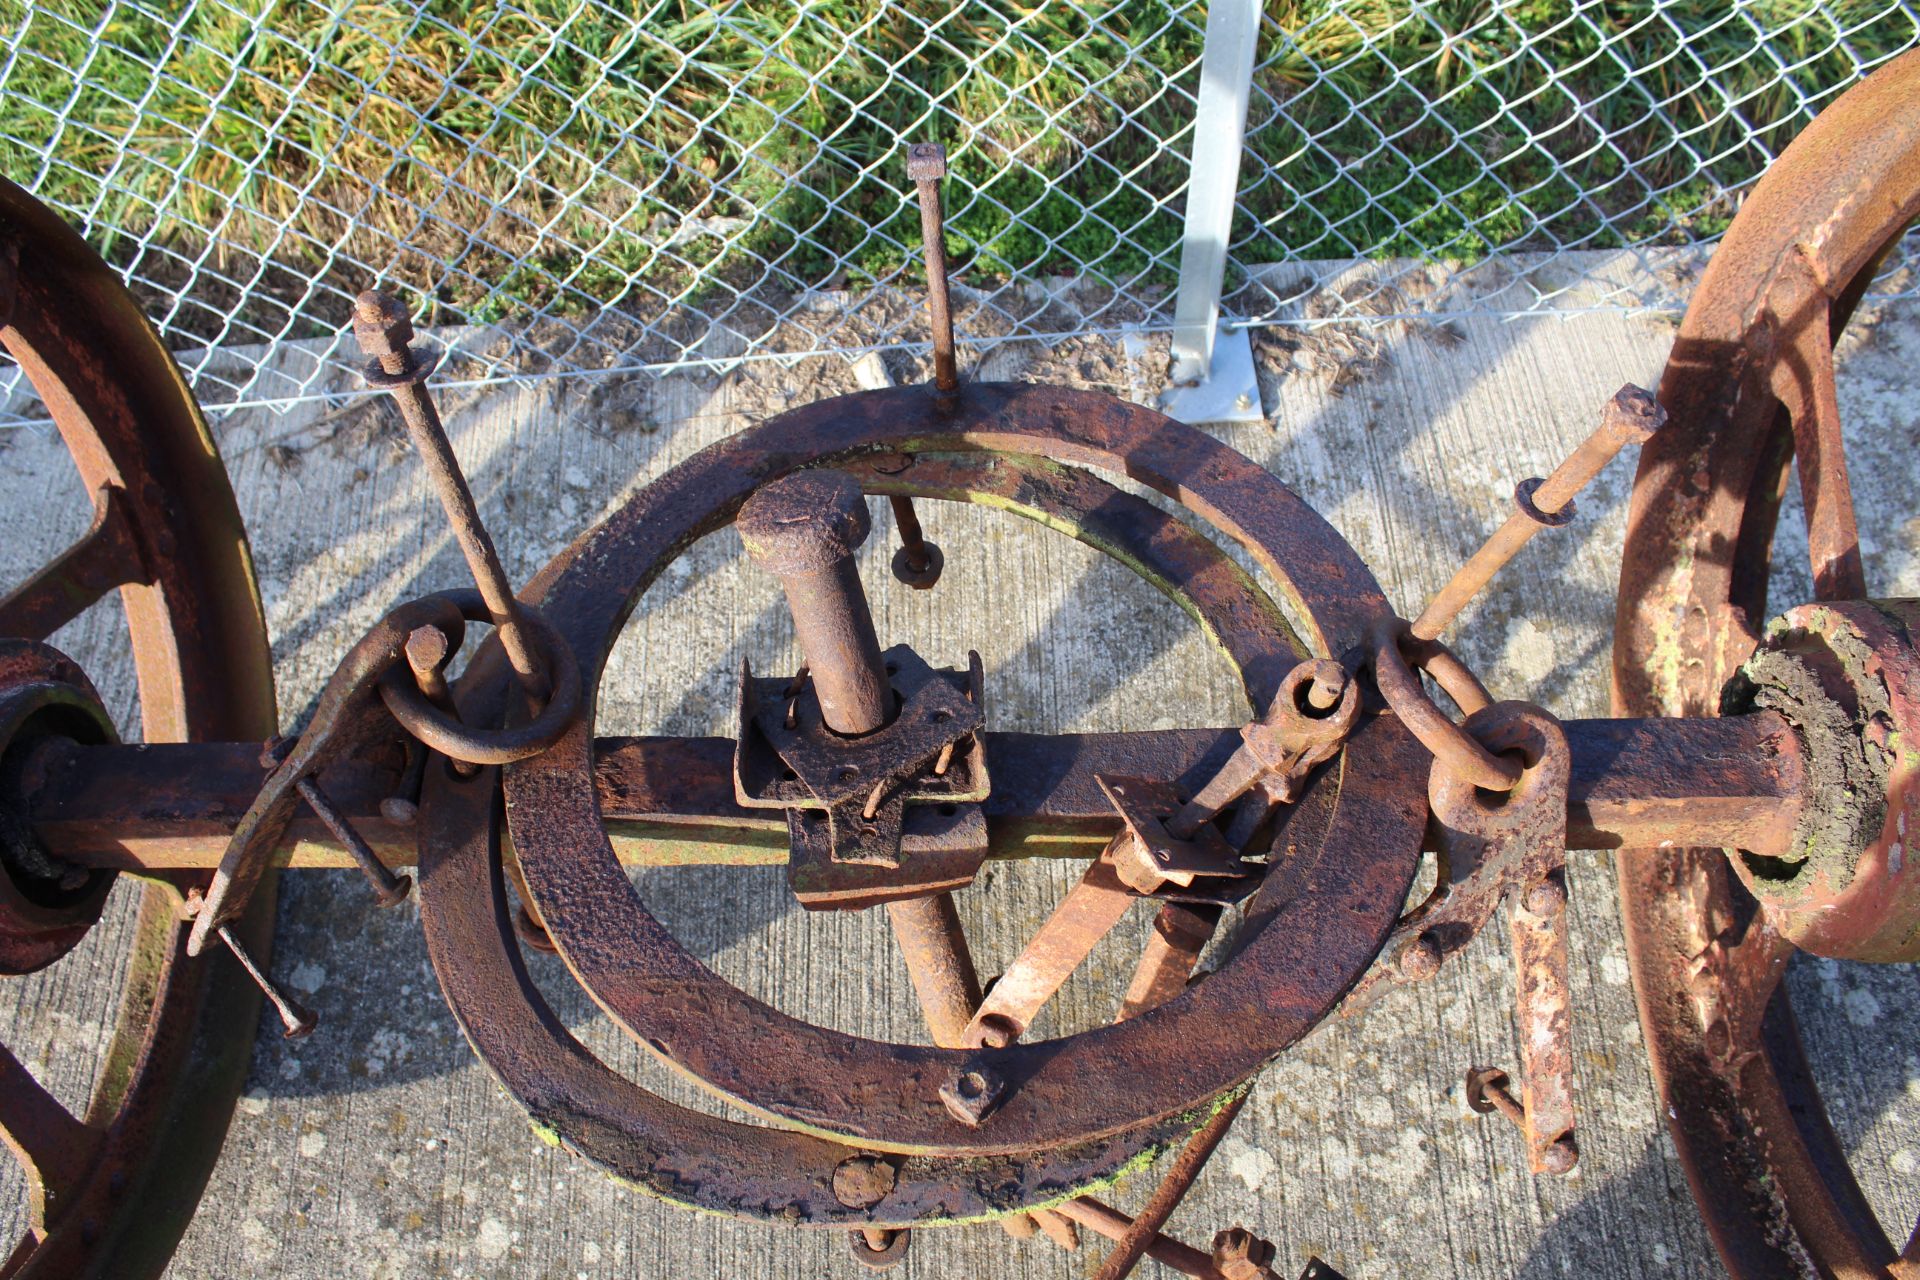 ** LOT WITHDRAWN ** Pair of cast iron wheels on axle with turntable. Ex-straw pitcher. - Image 7 of 7